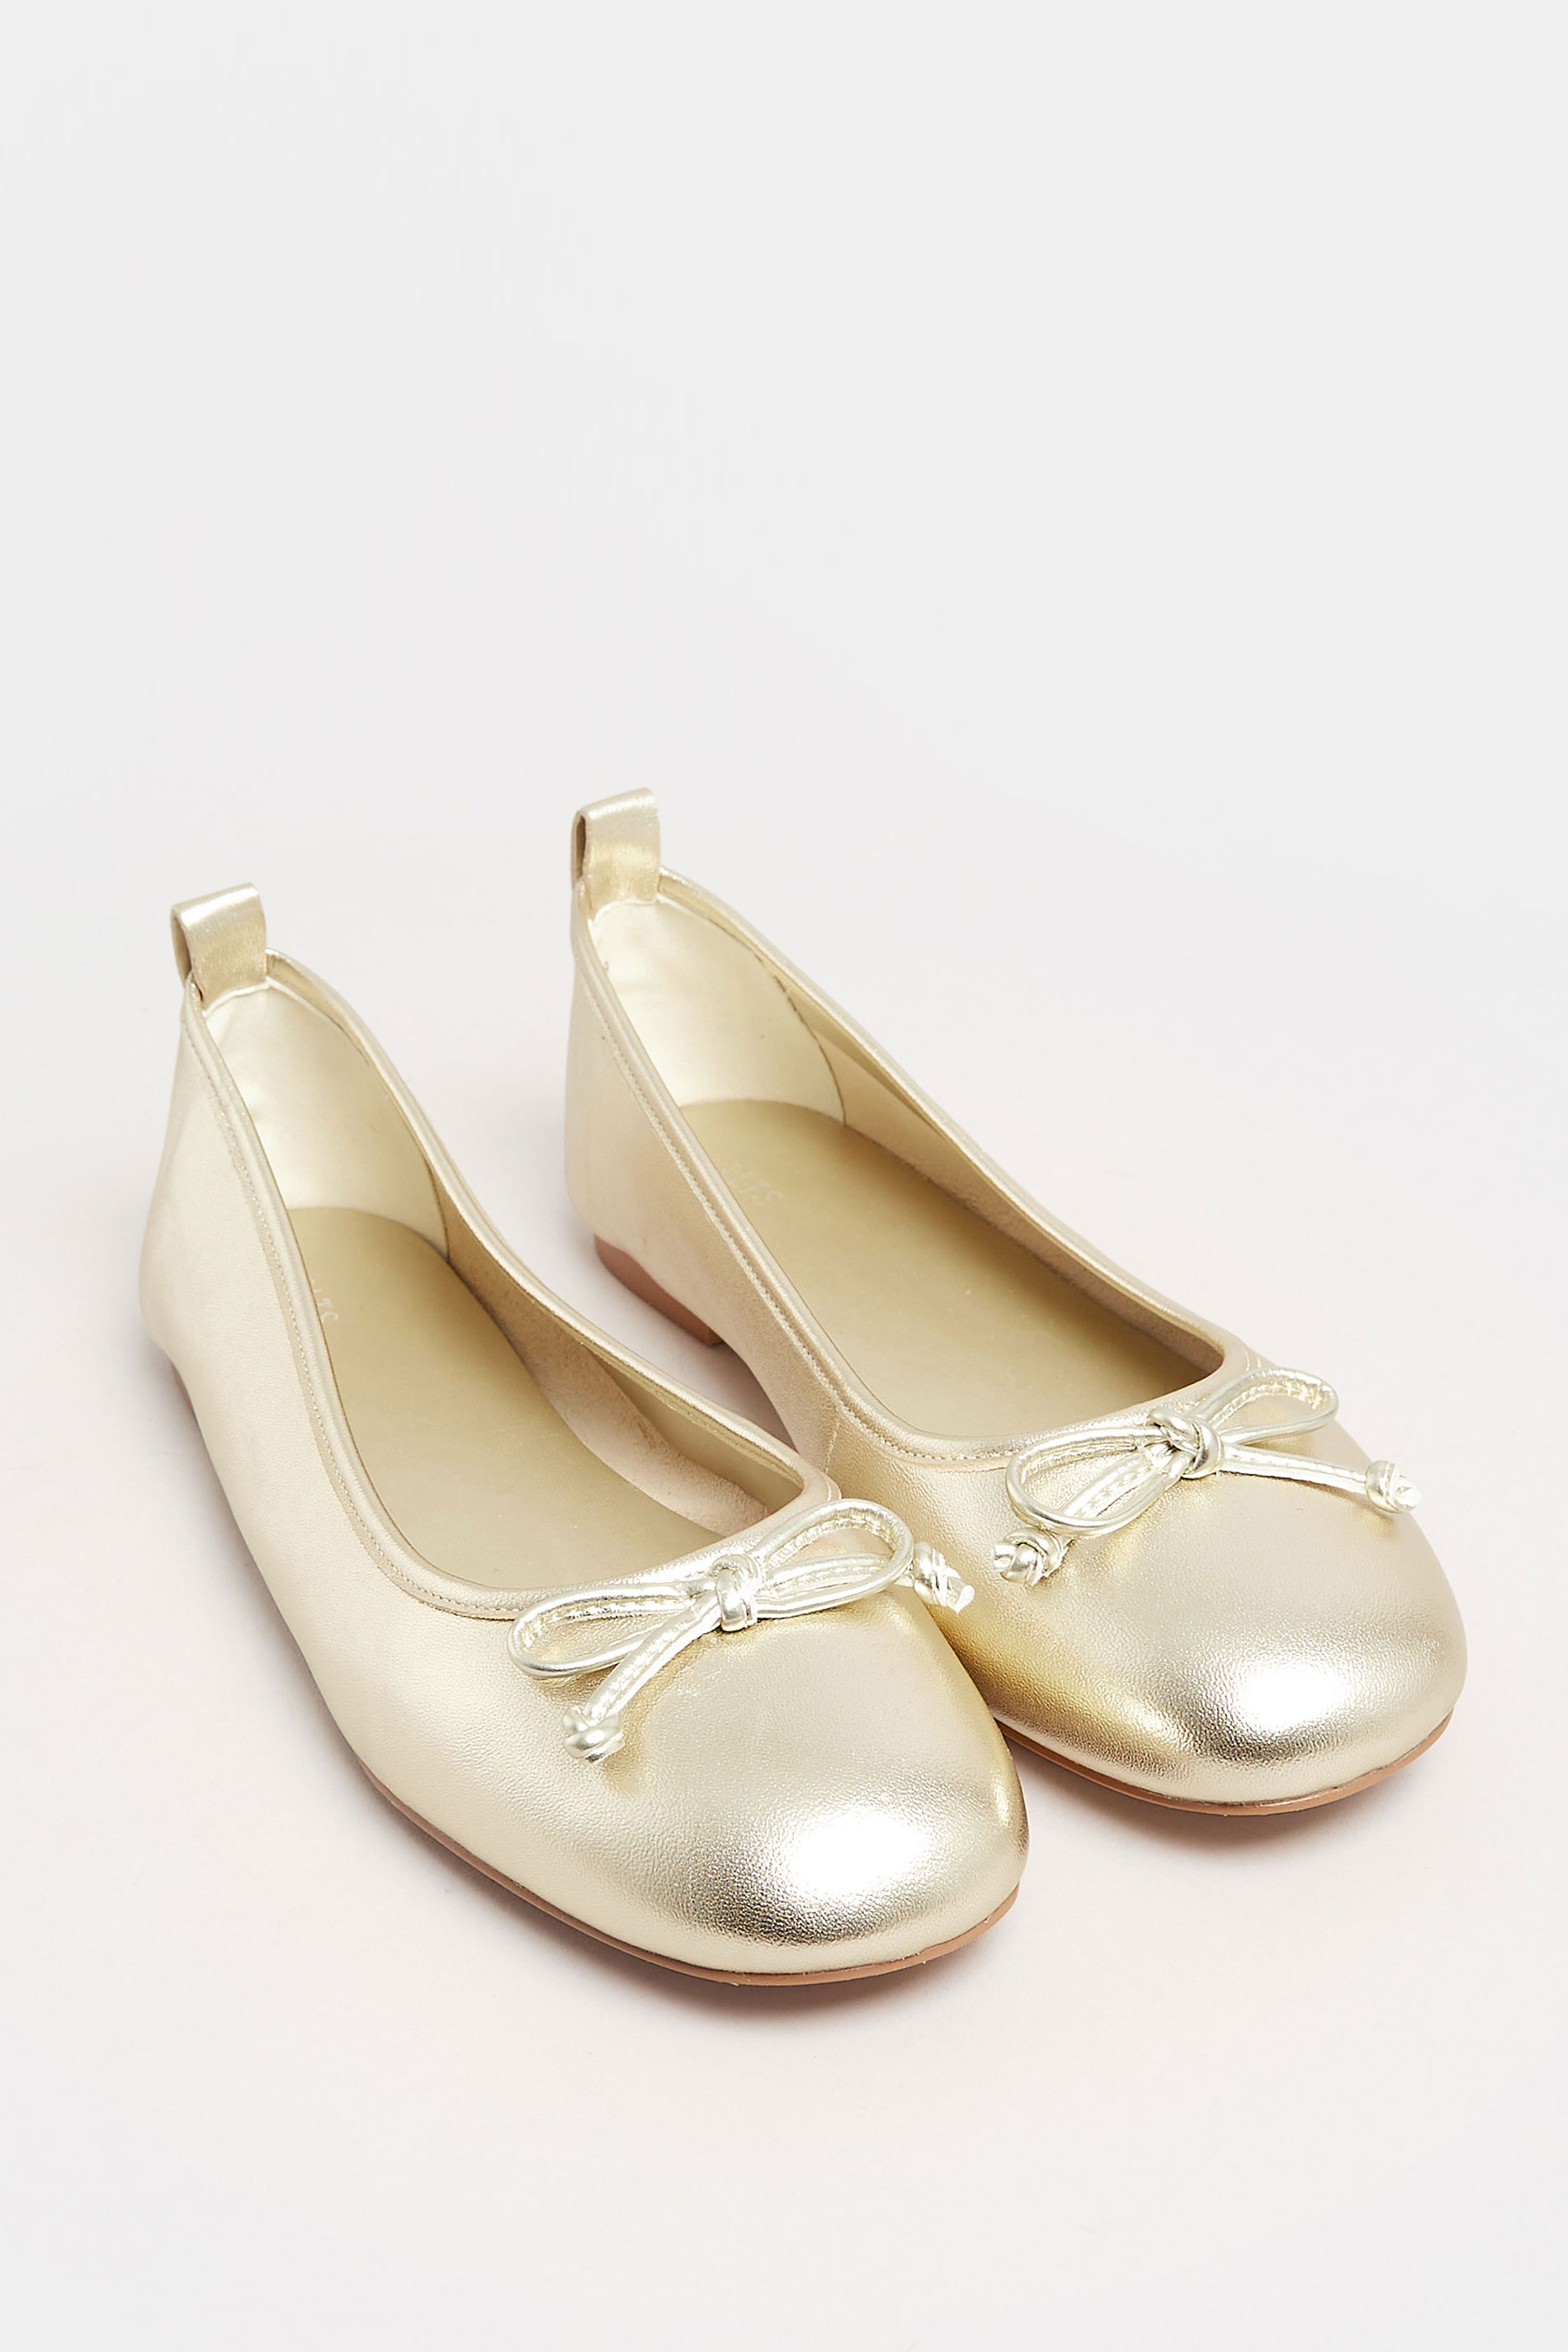 LTS Gold Leather Ballerina Pumps In Standard Fit | Long Tall Sally  2